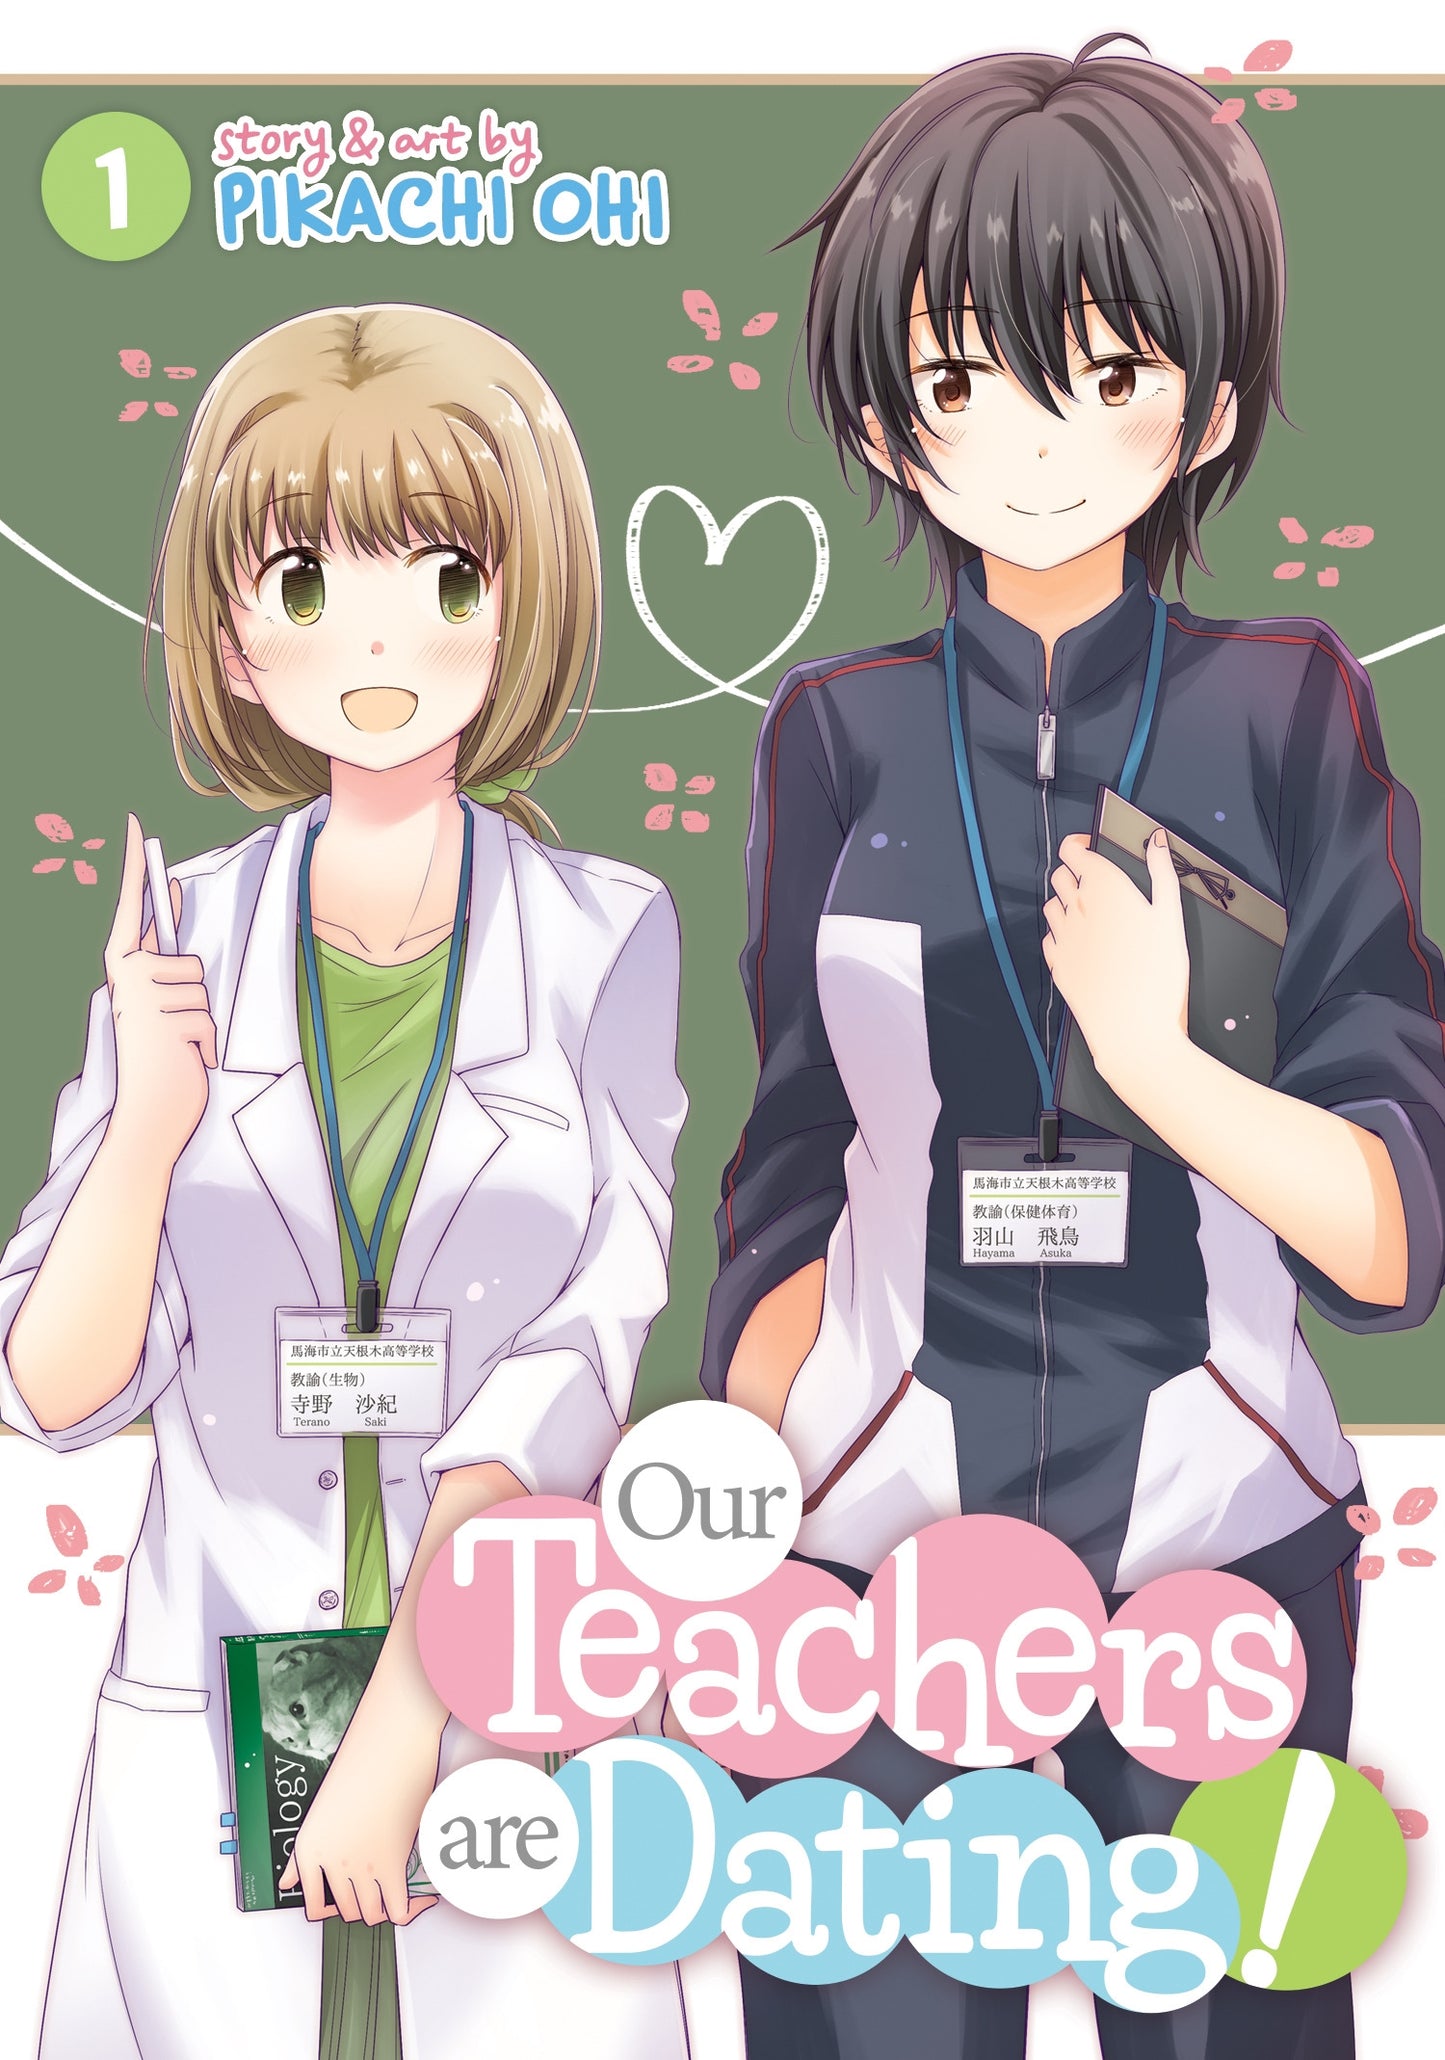 Our Teachers Are Dating! Vol. 1 - Manga Warehouse